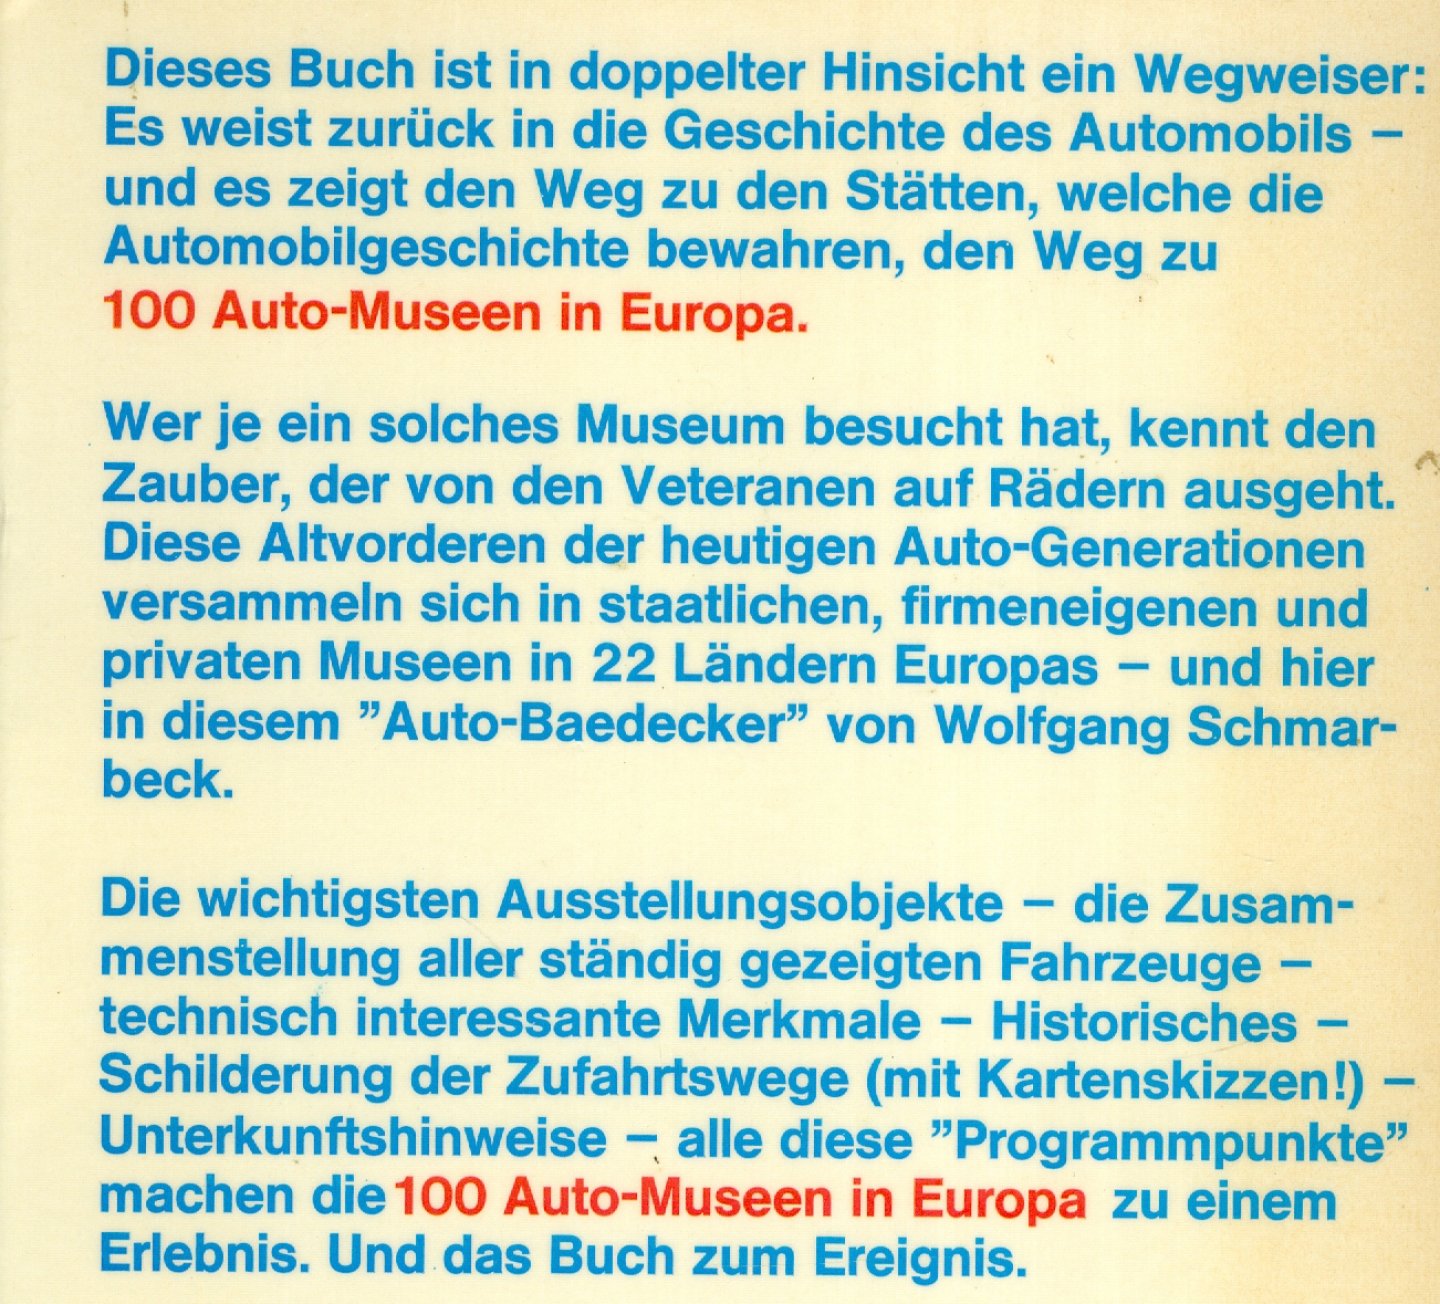 Schmarbeck, Wolfgang - 100 Auto-Museen in Europa